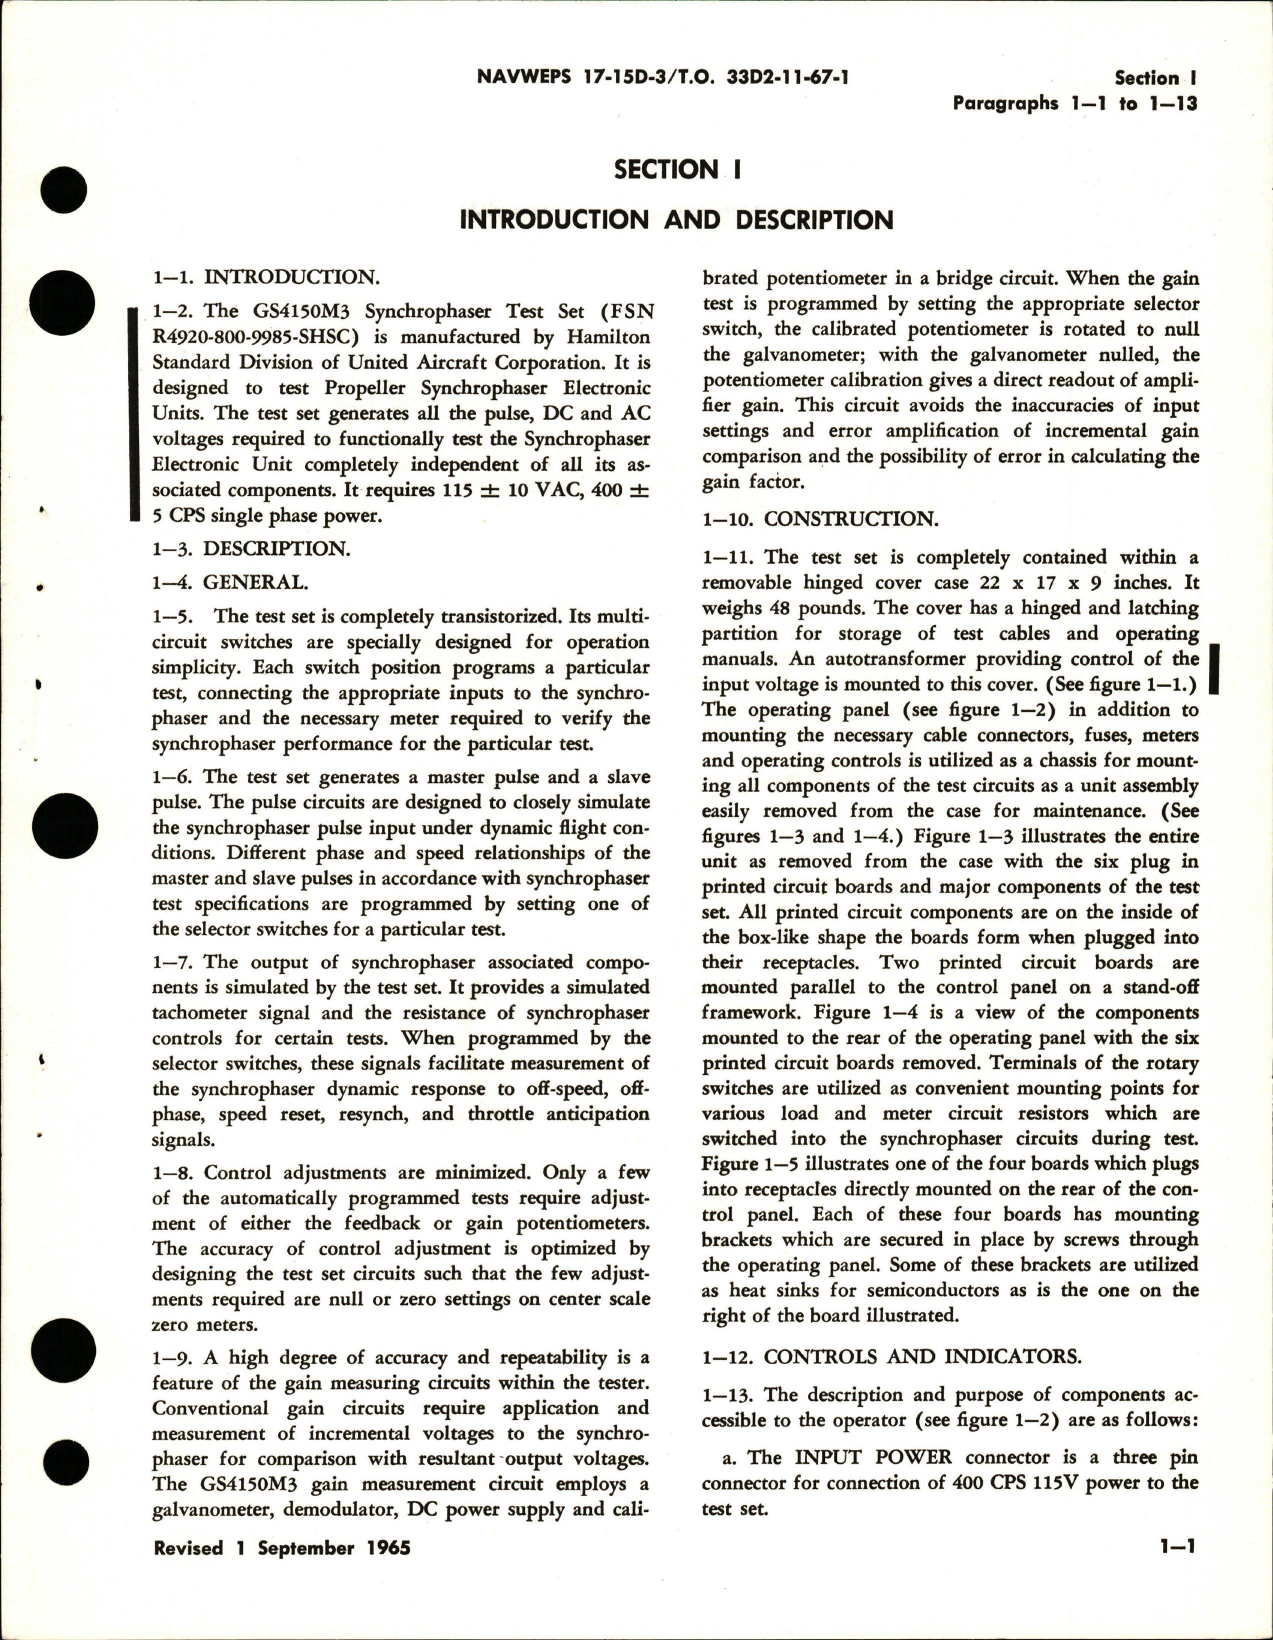 Sample page 5 from AirCorps Library document: Operation, Service Instructions with Illustrated Parts for Synchrophaser Test Set - Part GS4150M3